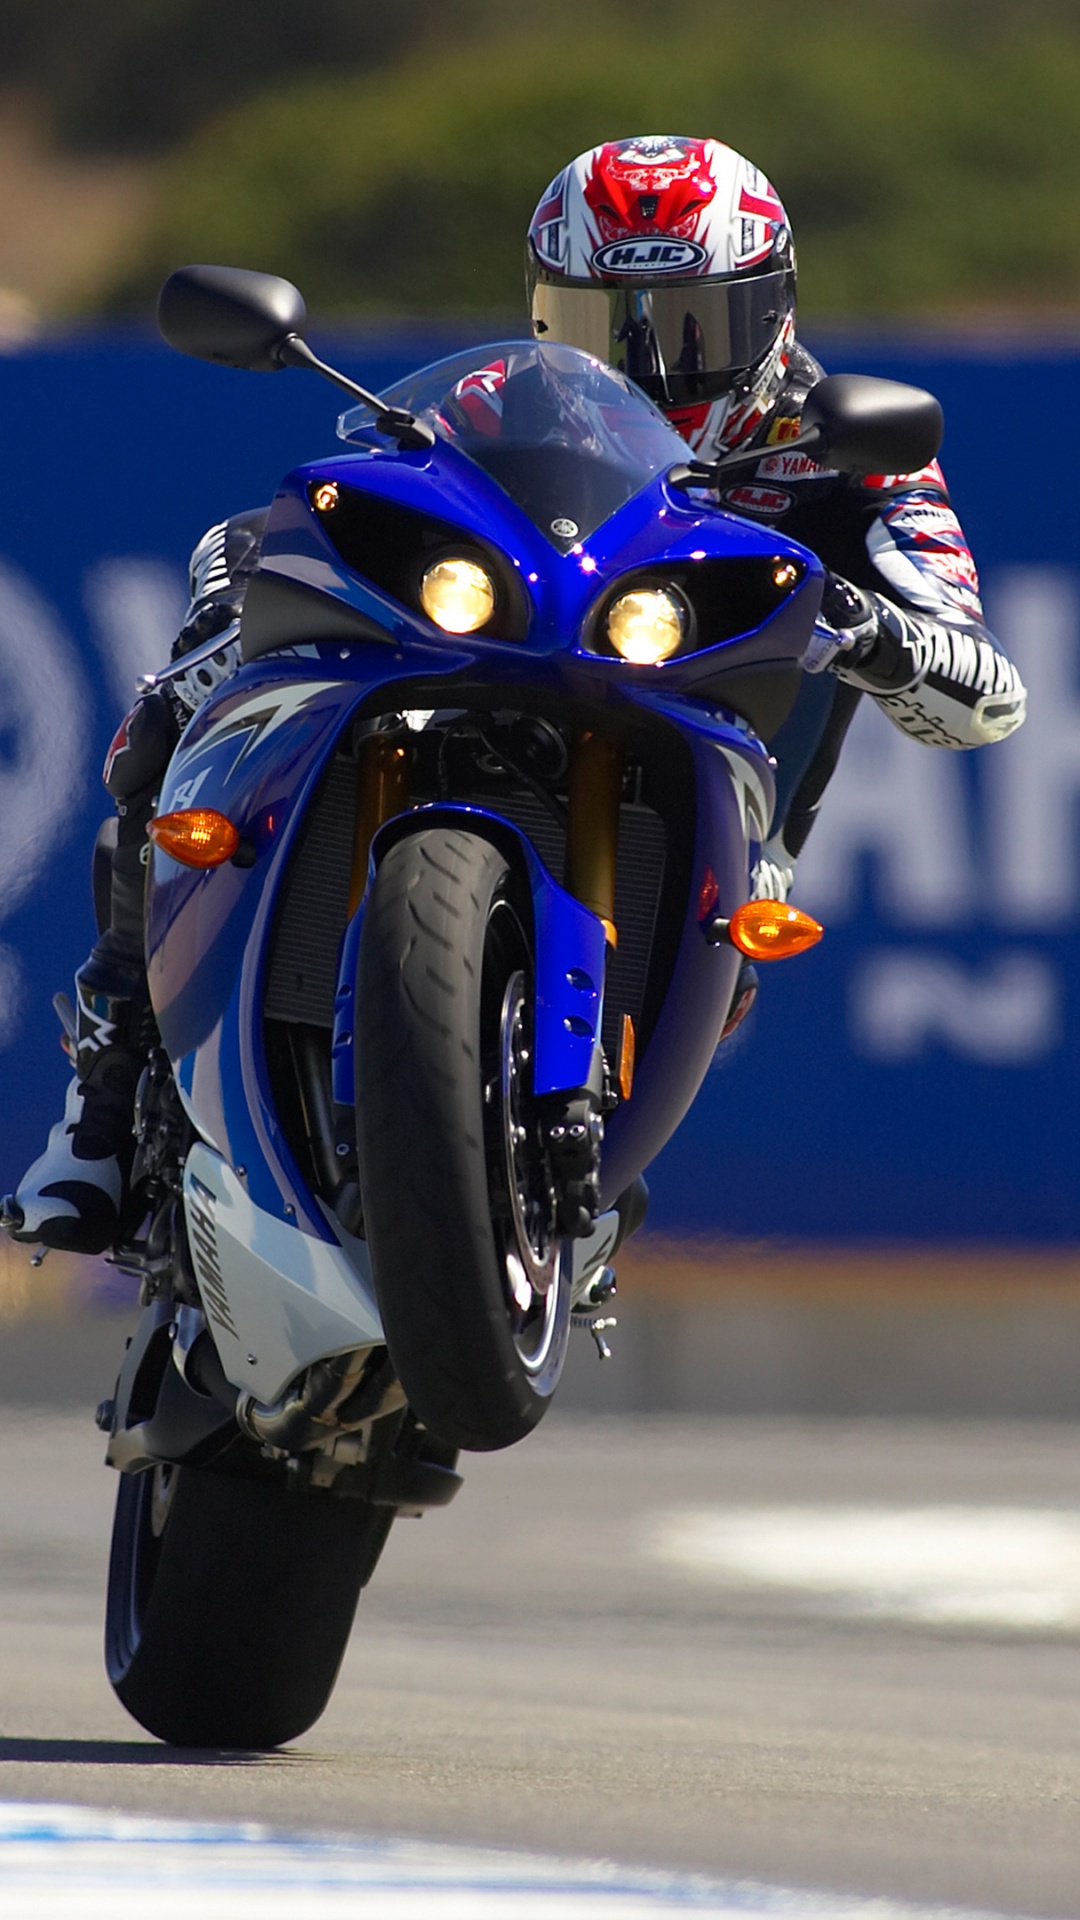 Man in Blue and Red Motorcycle Helmet Riding Blue and White Sports Bike. Wallpaper in 1080x1920 Resolution